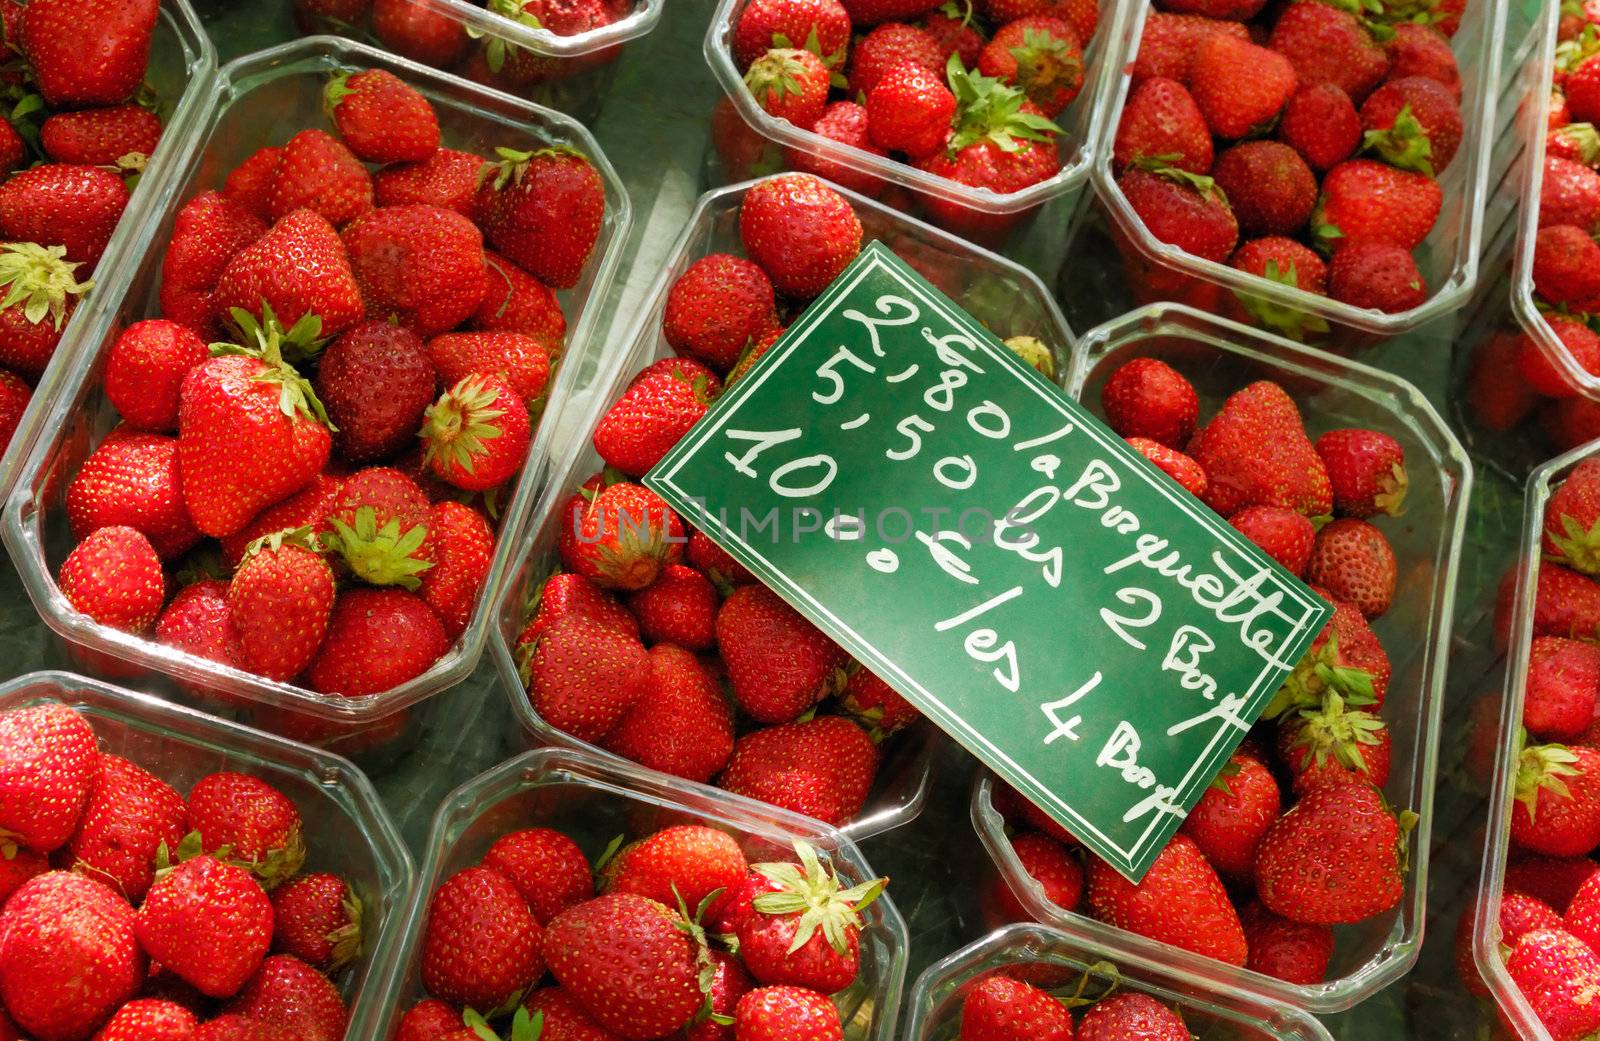 Image shows a strawberry stand in France